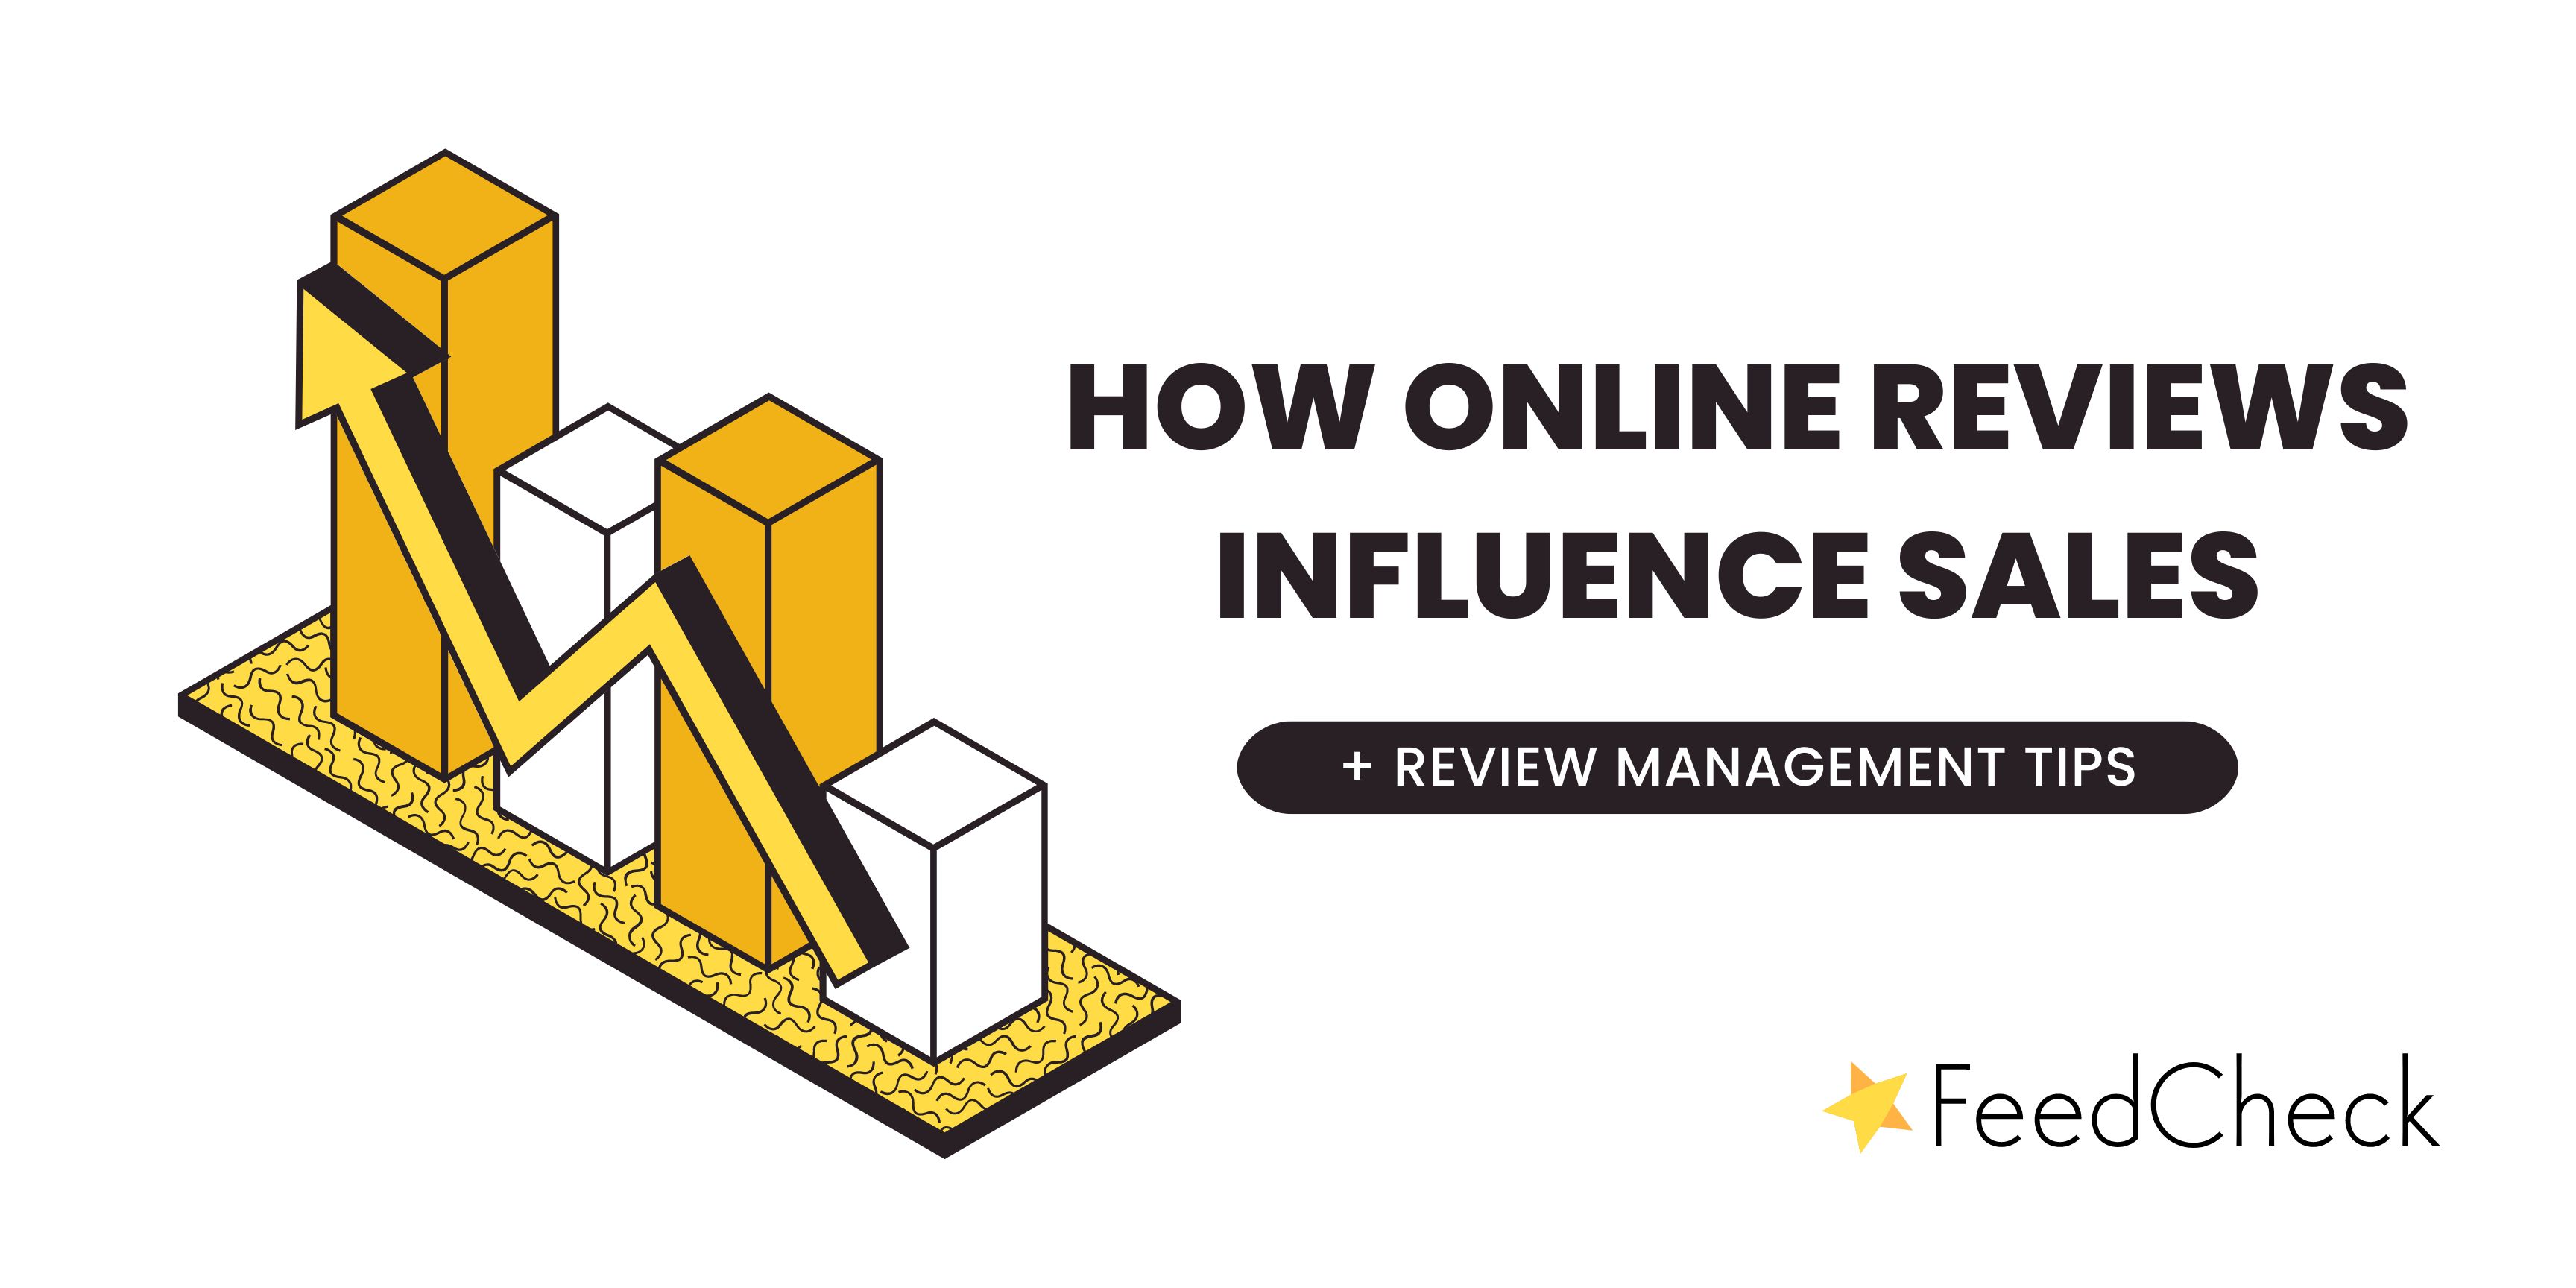 How online reviews influence sales (with review management tips)